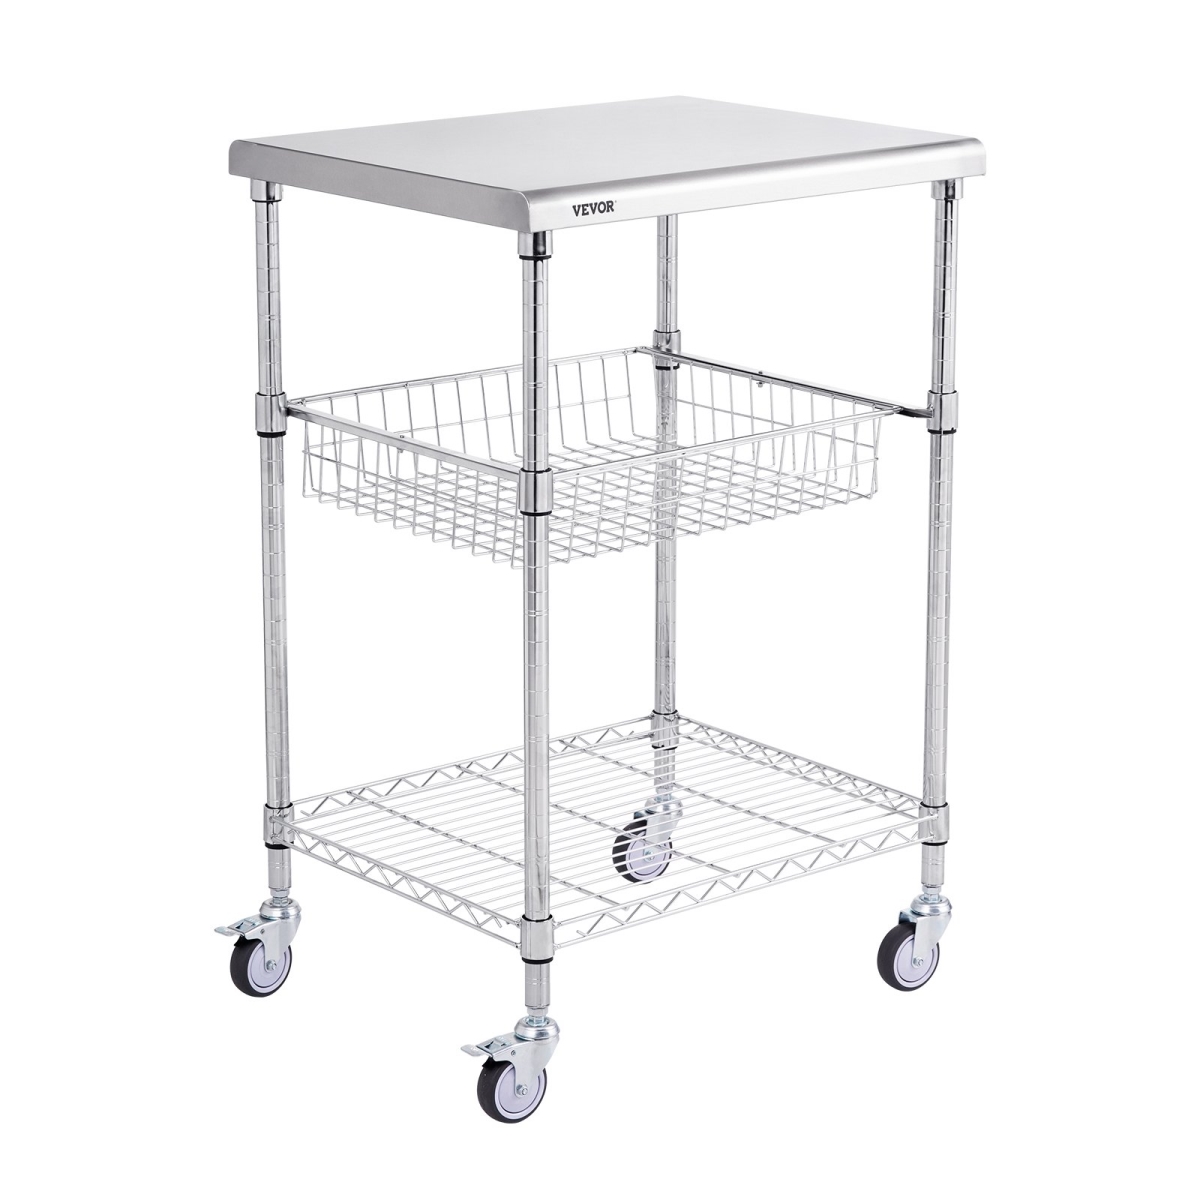 Picture of Vevor LLCFTCCB20X24IGJ4V0 24 x 20 x 36.6 in. 3-Tier Utility Cart Rolling Cart on Wheels 6 Hooks - 470 lbs